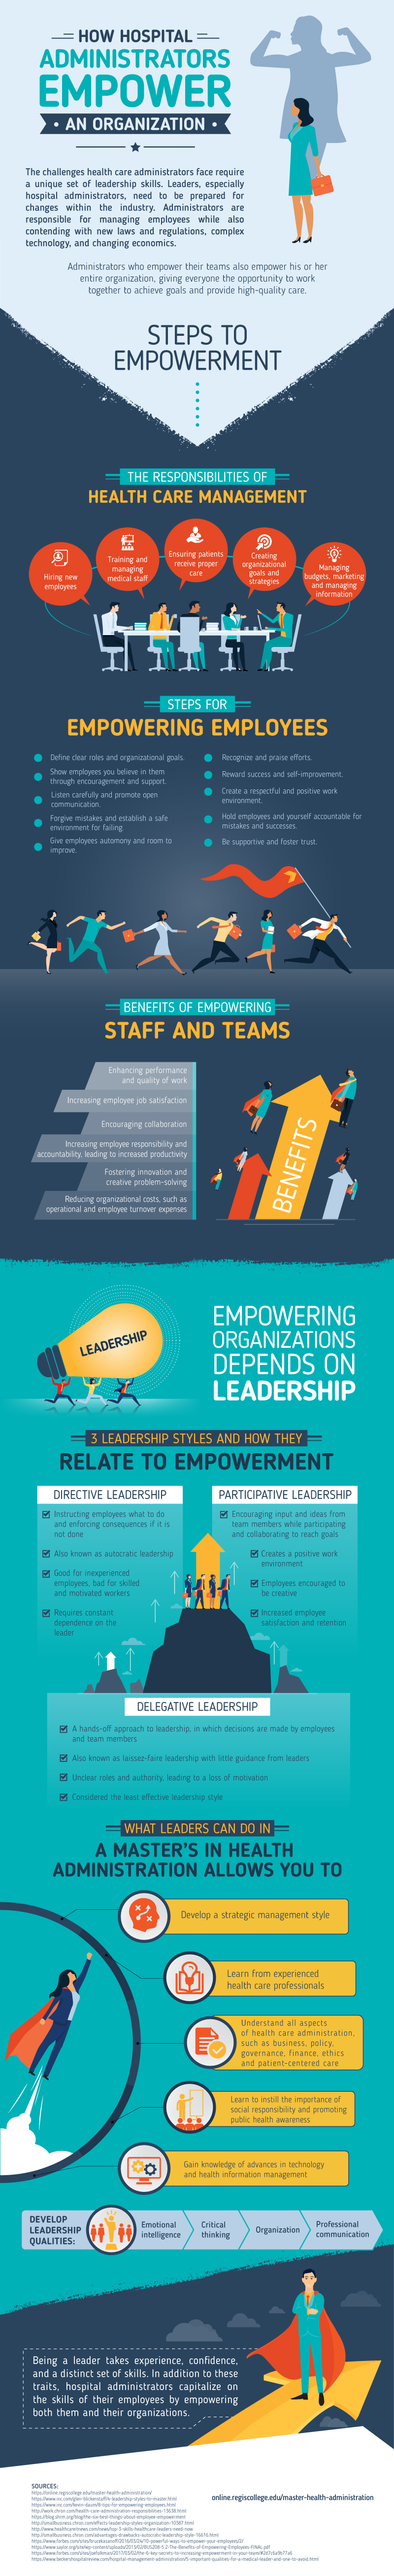 How Hospital Administrators Empower Their Organizations